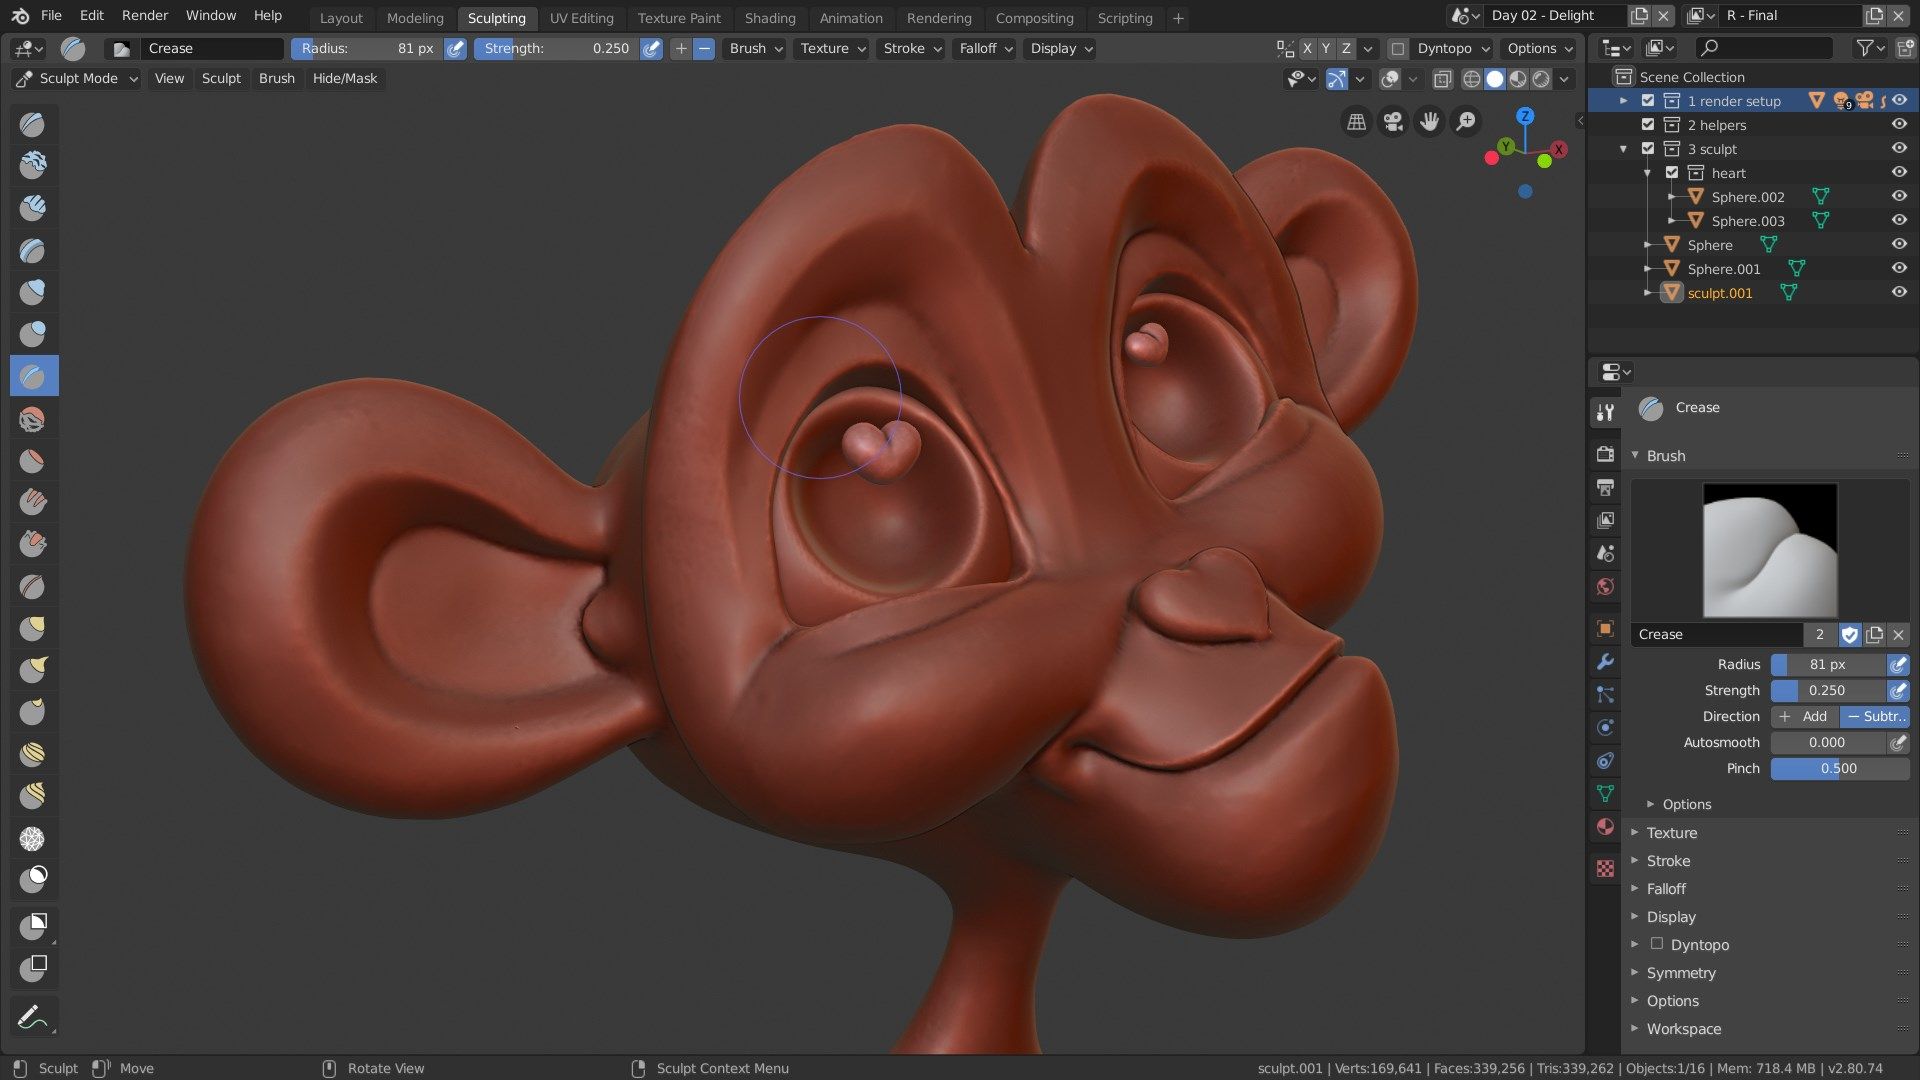 Blender offers many advanced tools like sculpting